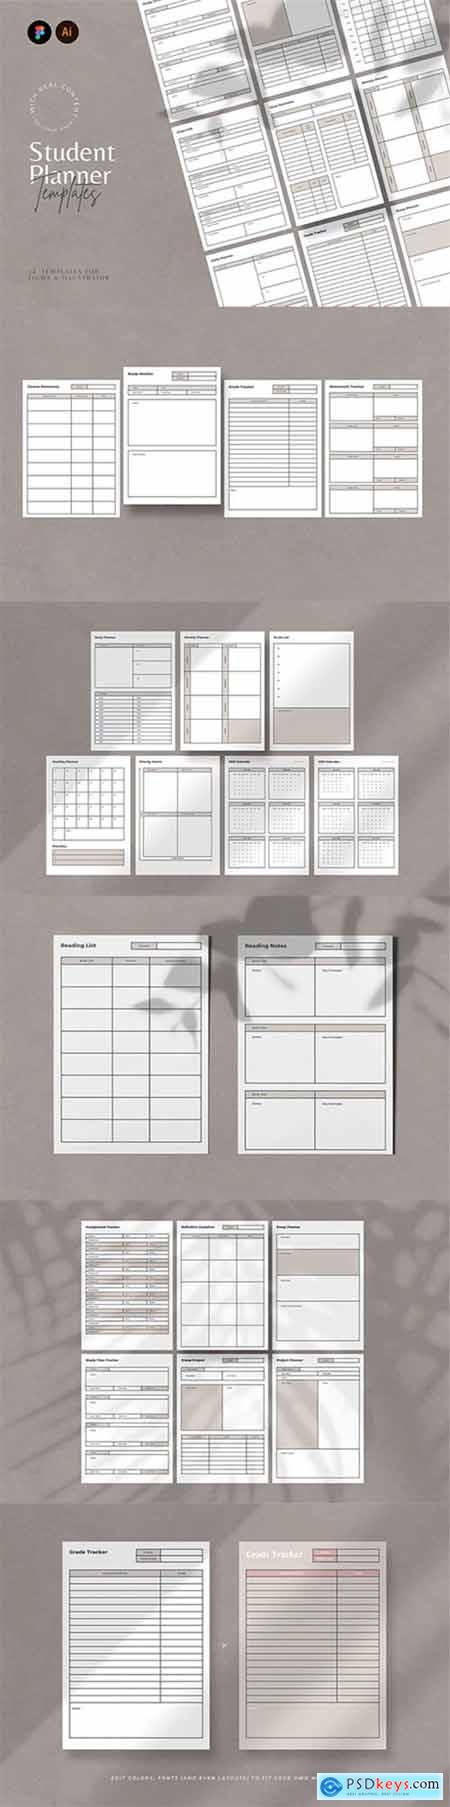 Student Planner Templates